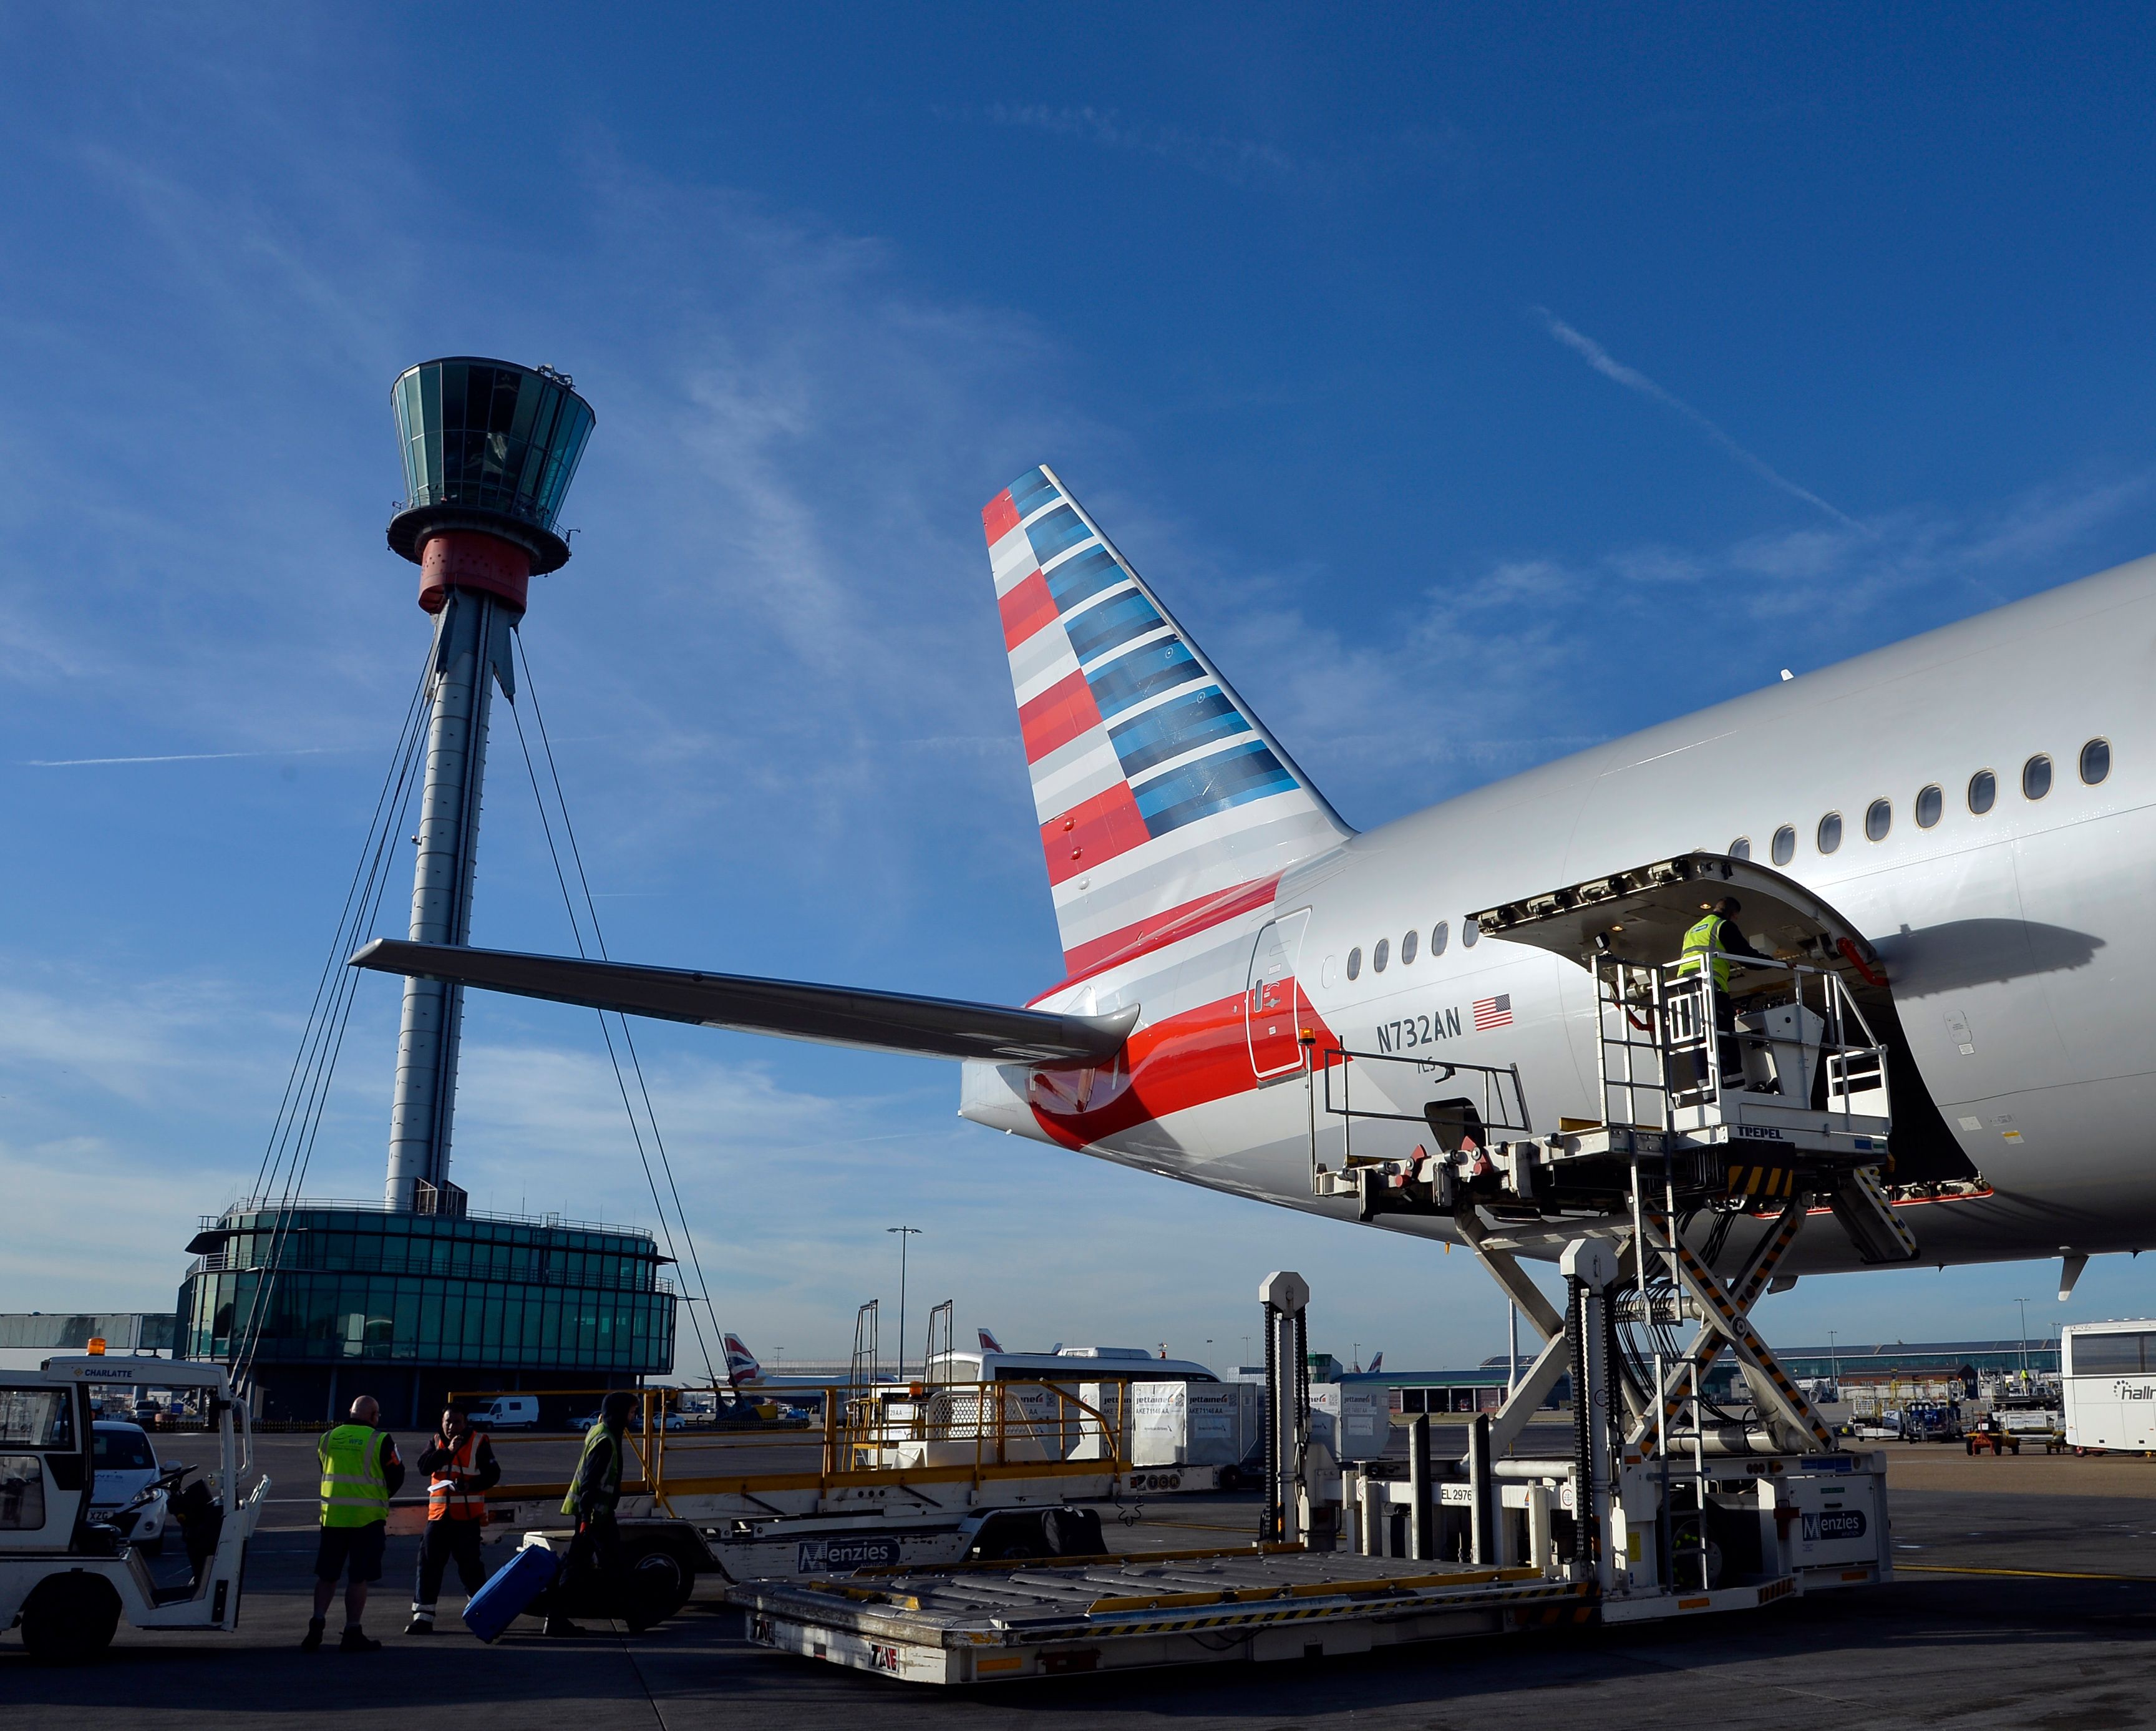 An American Airlines aircraft being loaded with cargo on the apron at London Heathrow Airport.